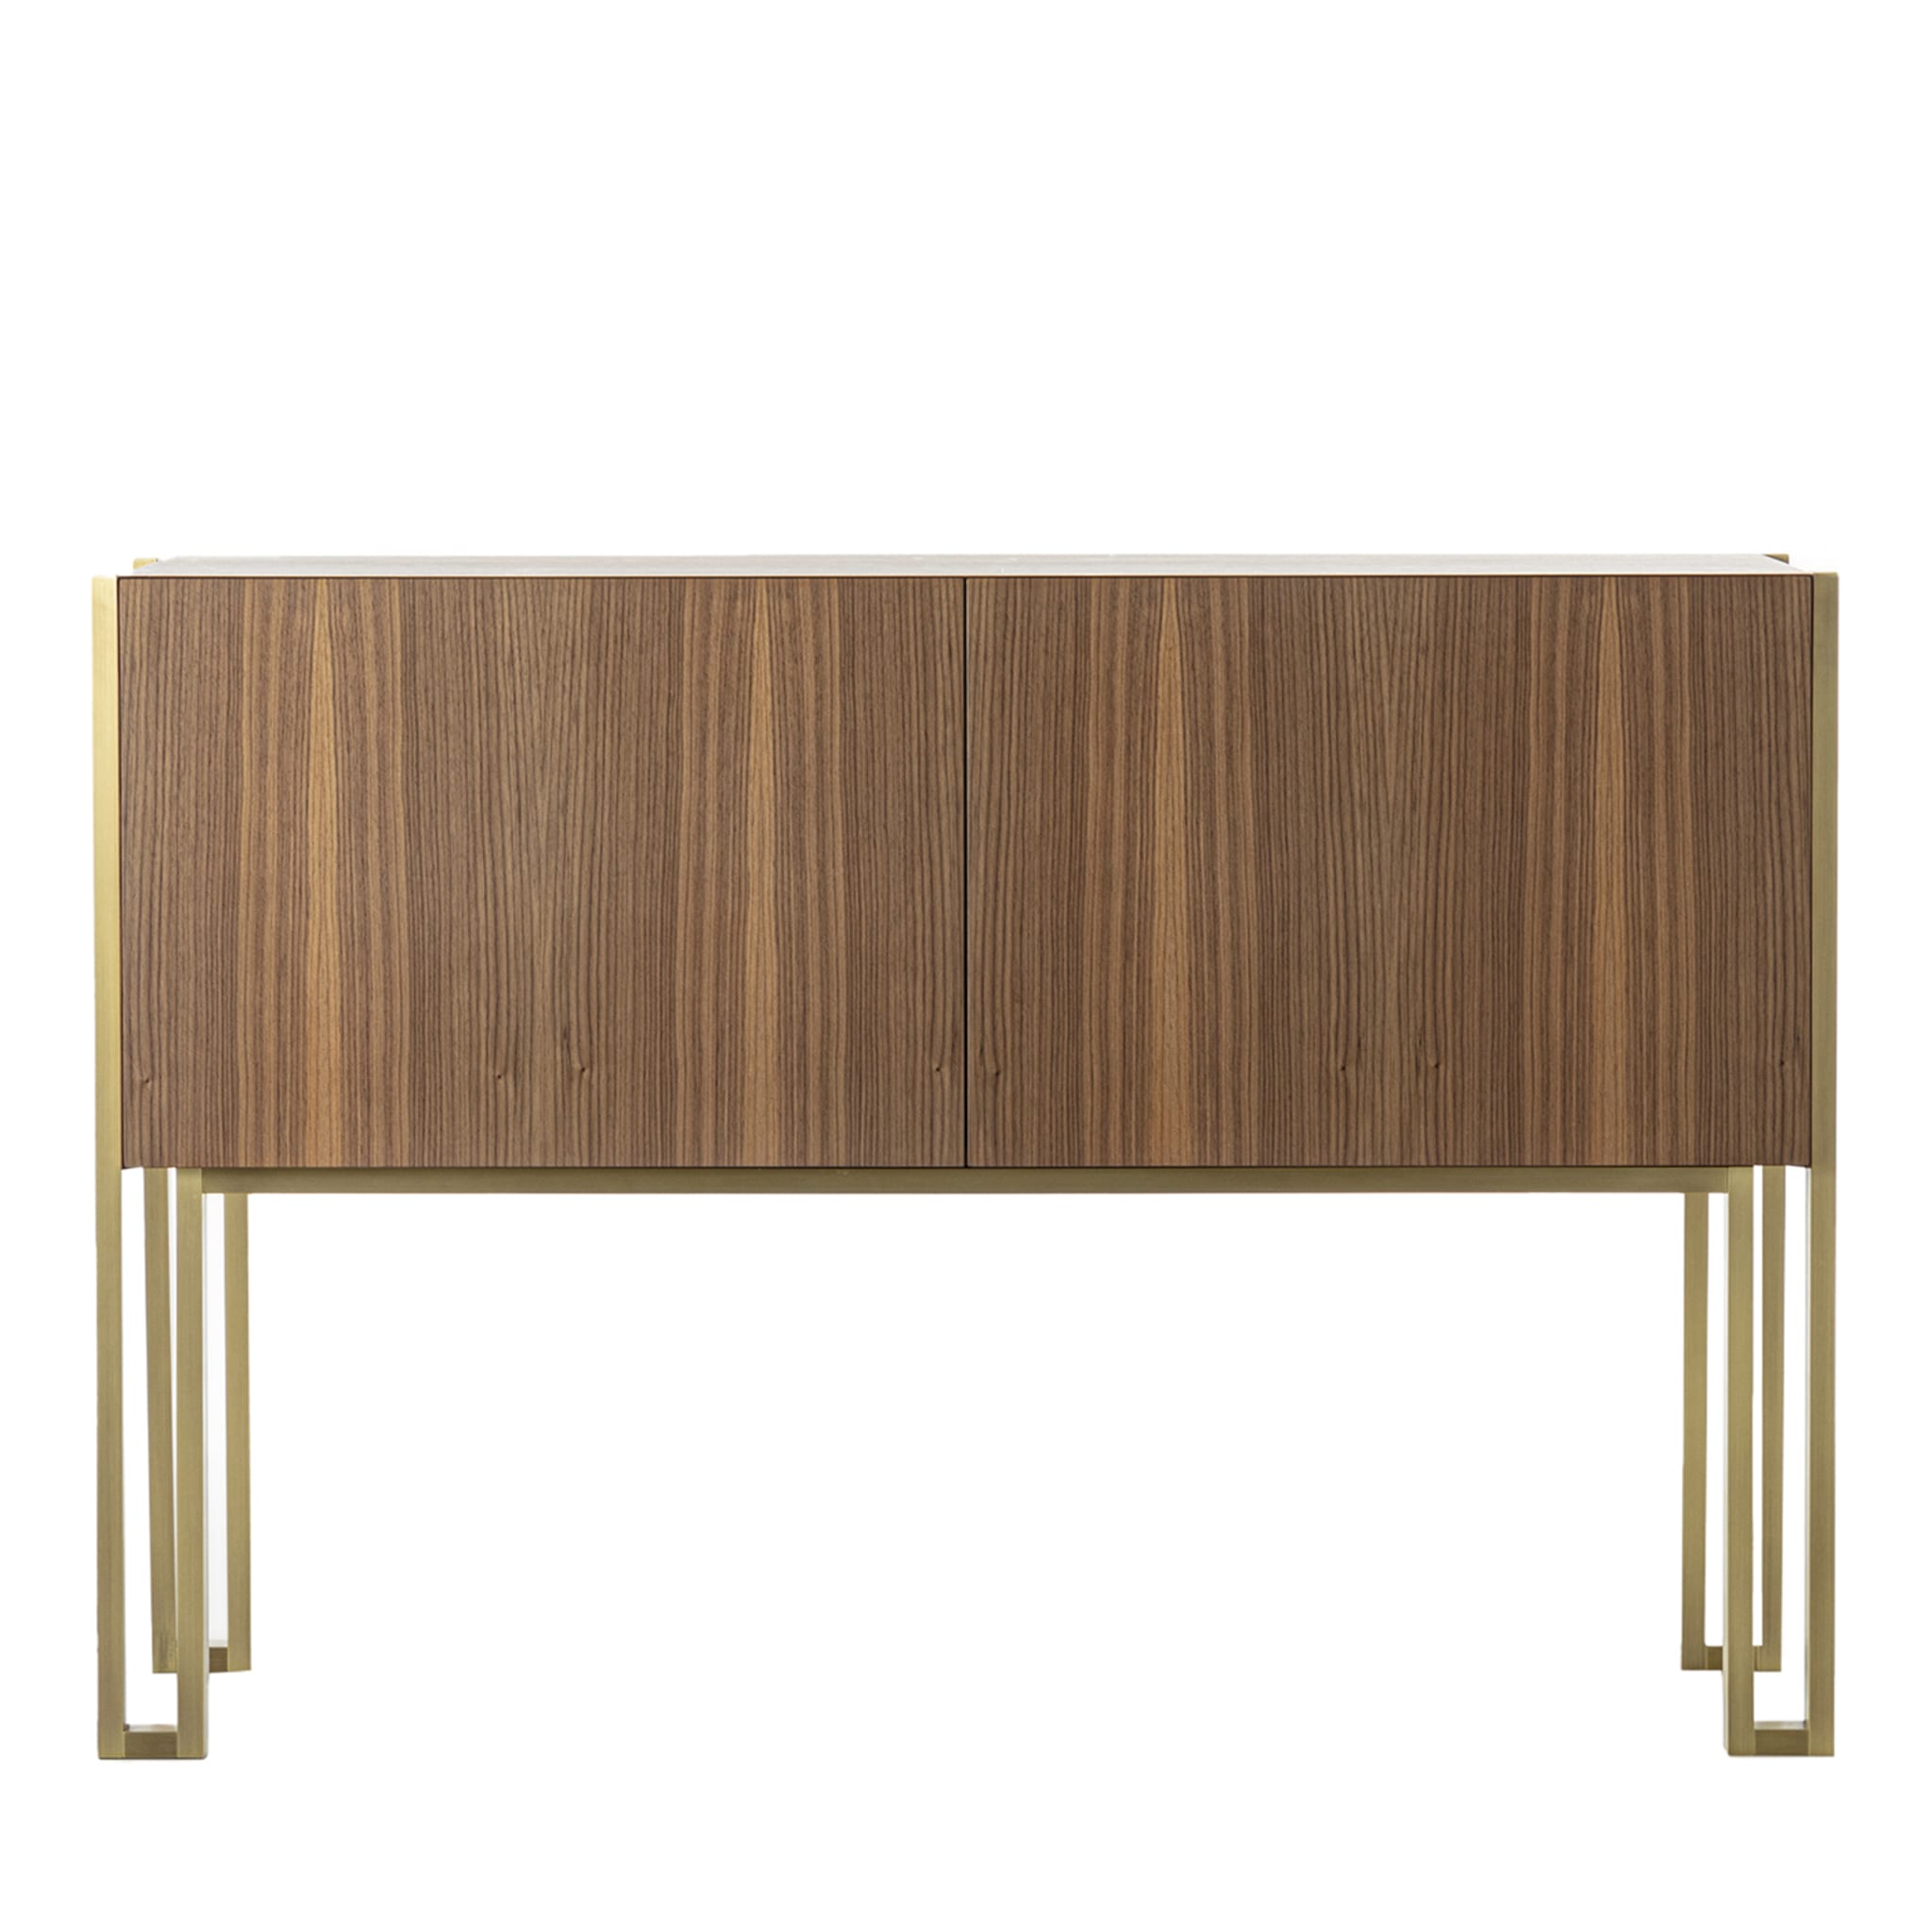 Mirage Vintage with Brass Legs in Canaletto Walnut Sideboard - Main view